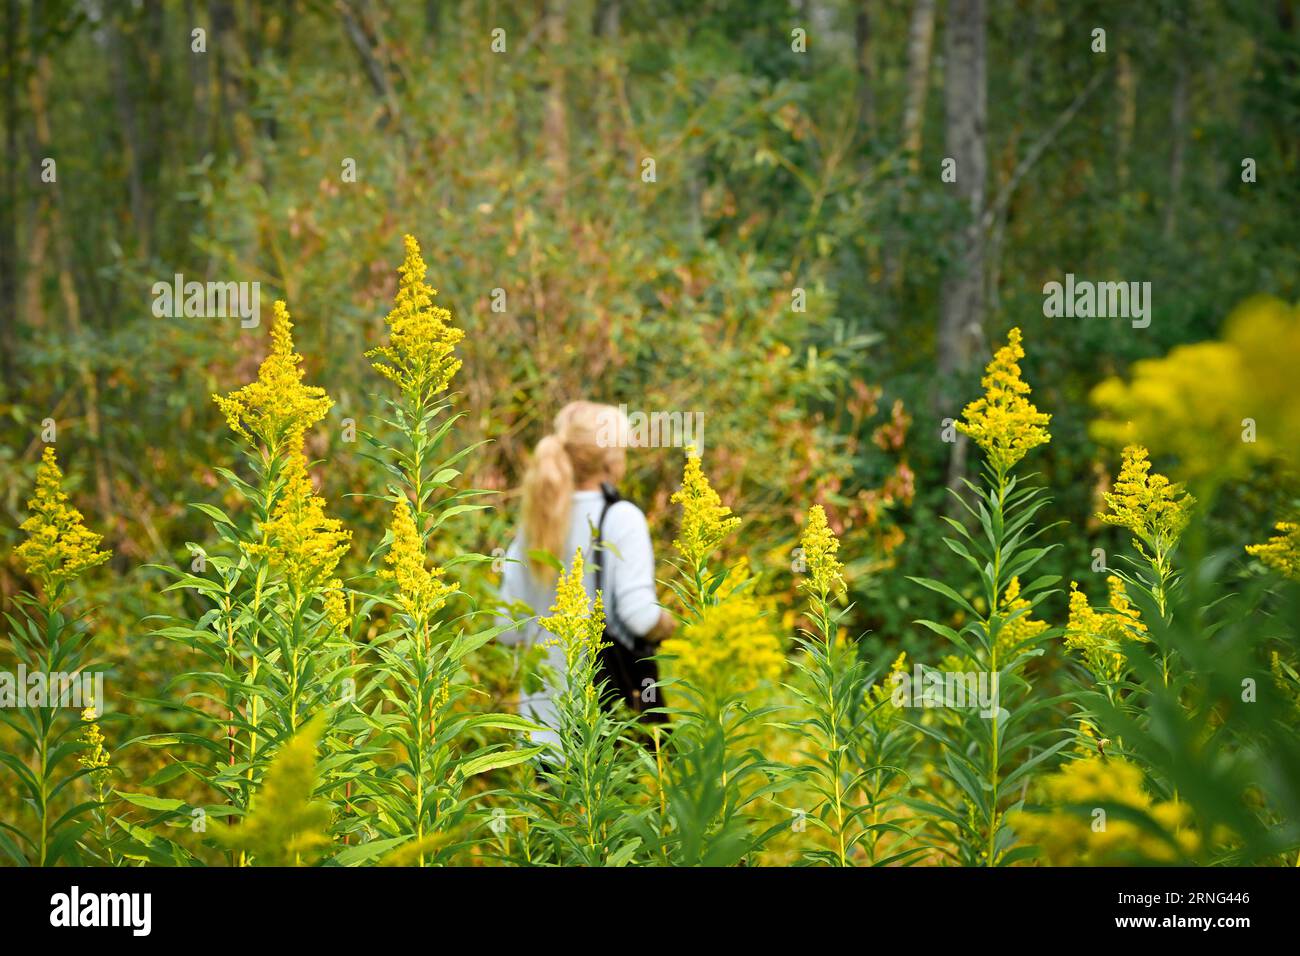 Goldenrod flowers beside trail, Maplewood Flats, North Vancouver, British Columbia, Canada Stock Photo